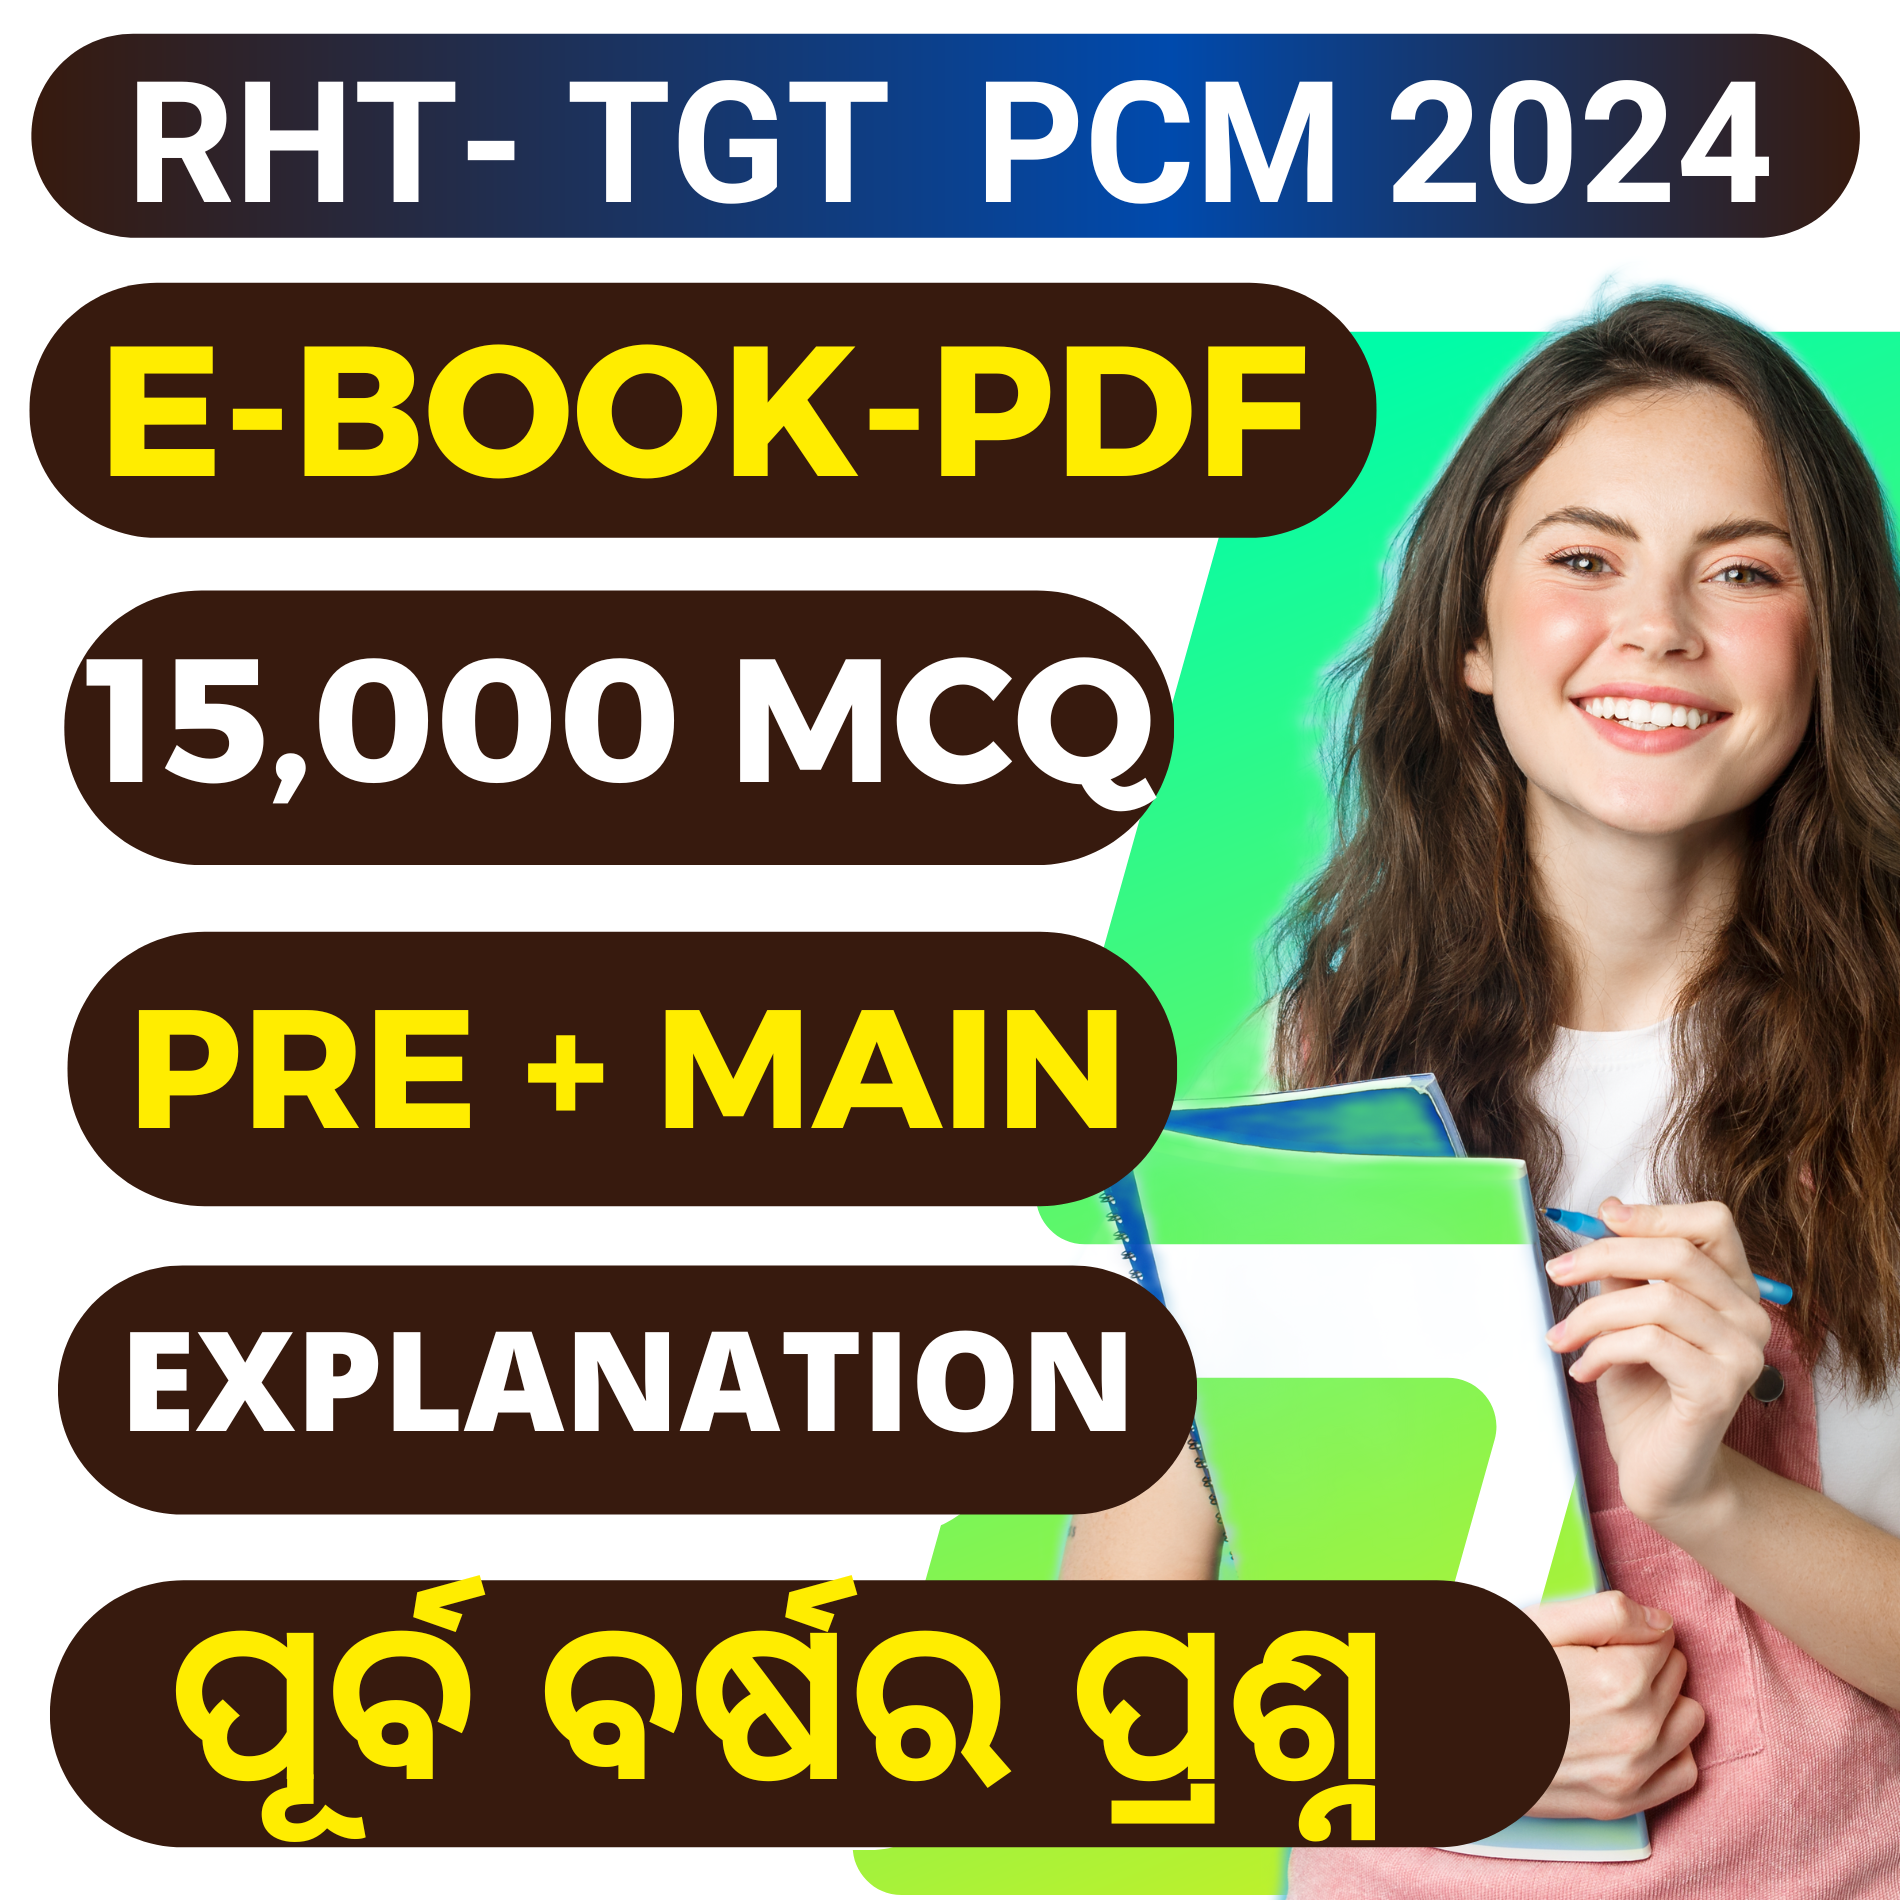 F- RHT- HIGH SCHOOL TEACHER (TGT PCM SCIENCE) 2024 EXAM !! E-BOOK (PDF) 15,000 BEST MCQ !! CHAPTER WISE QUESTIONS &amp; ANSWER